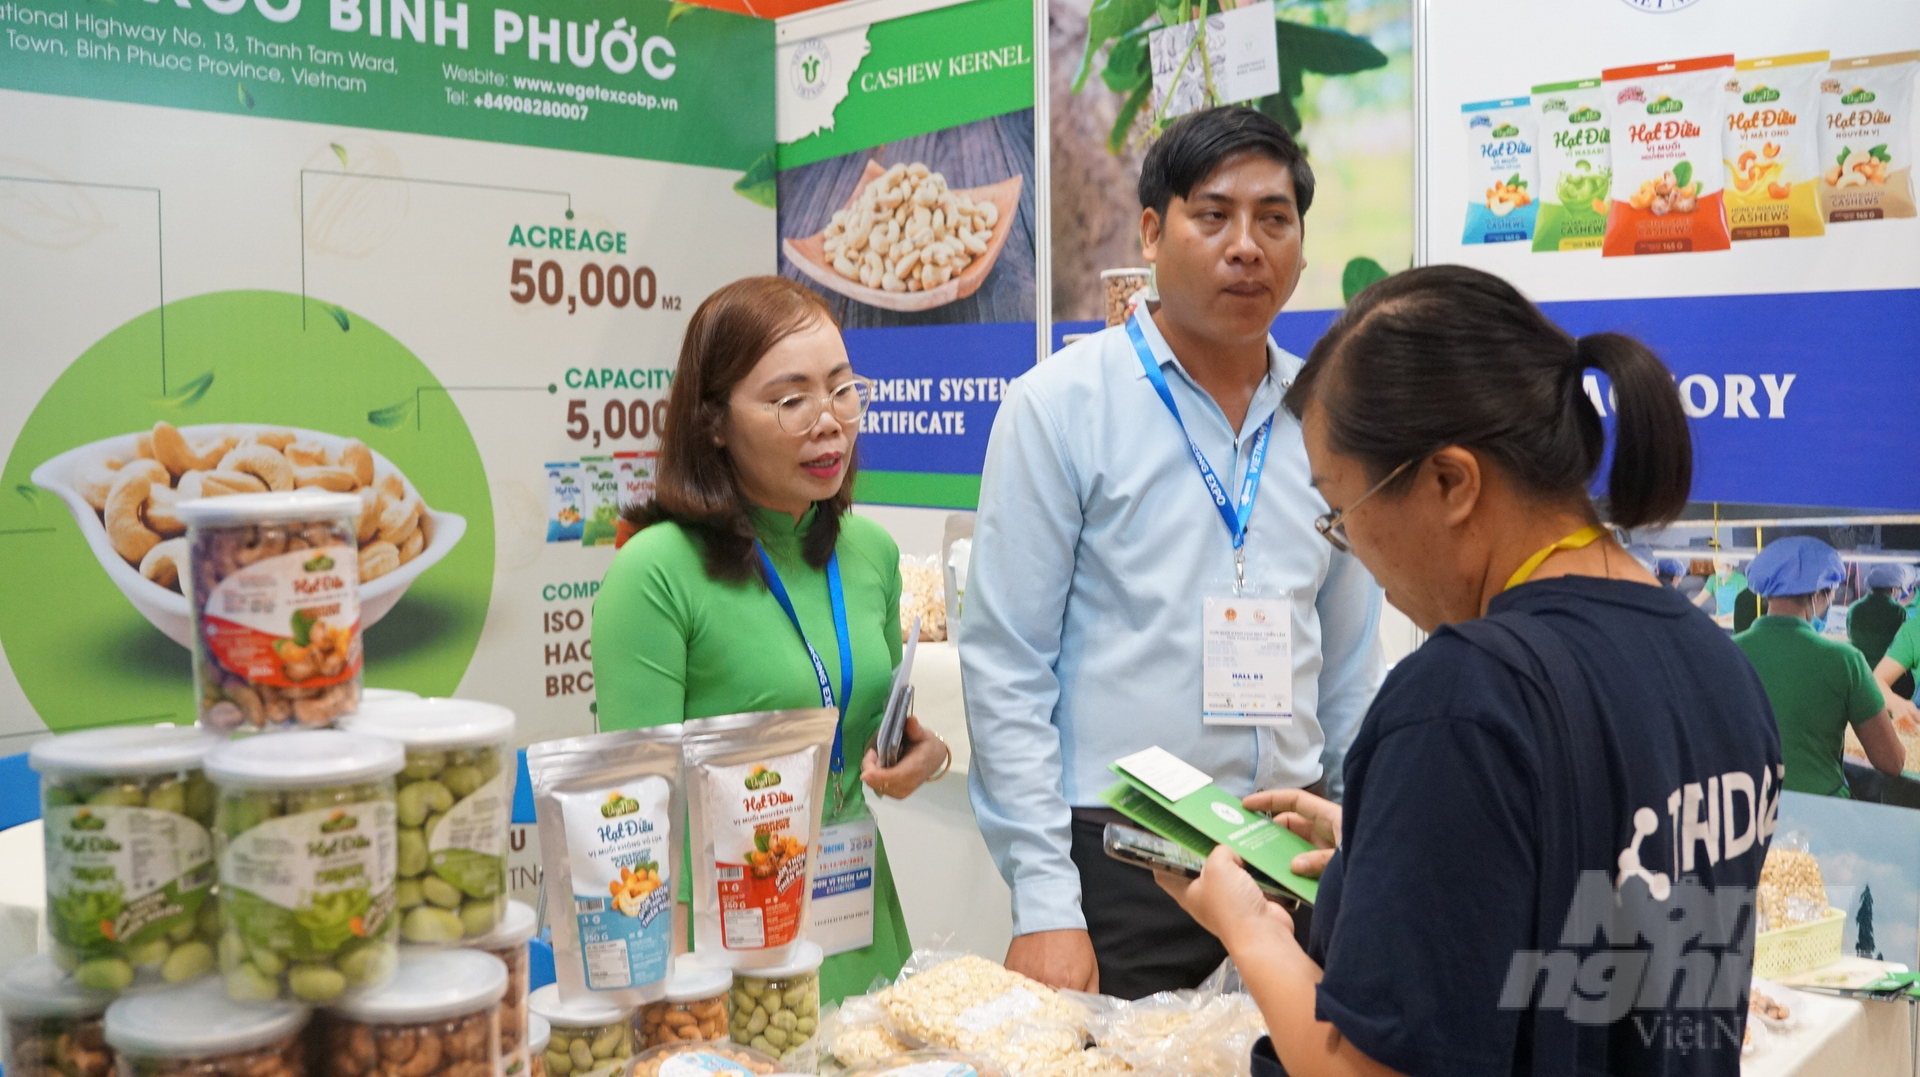 Binh Phuoc province showcases a wide array of its distinctive agricultural products at various domestic and international trade fairs and exhibitions. Photo: Nguyen Thuy.